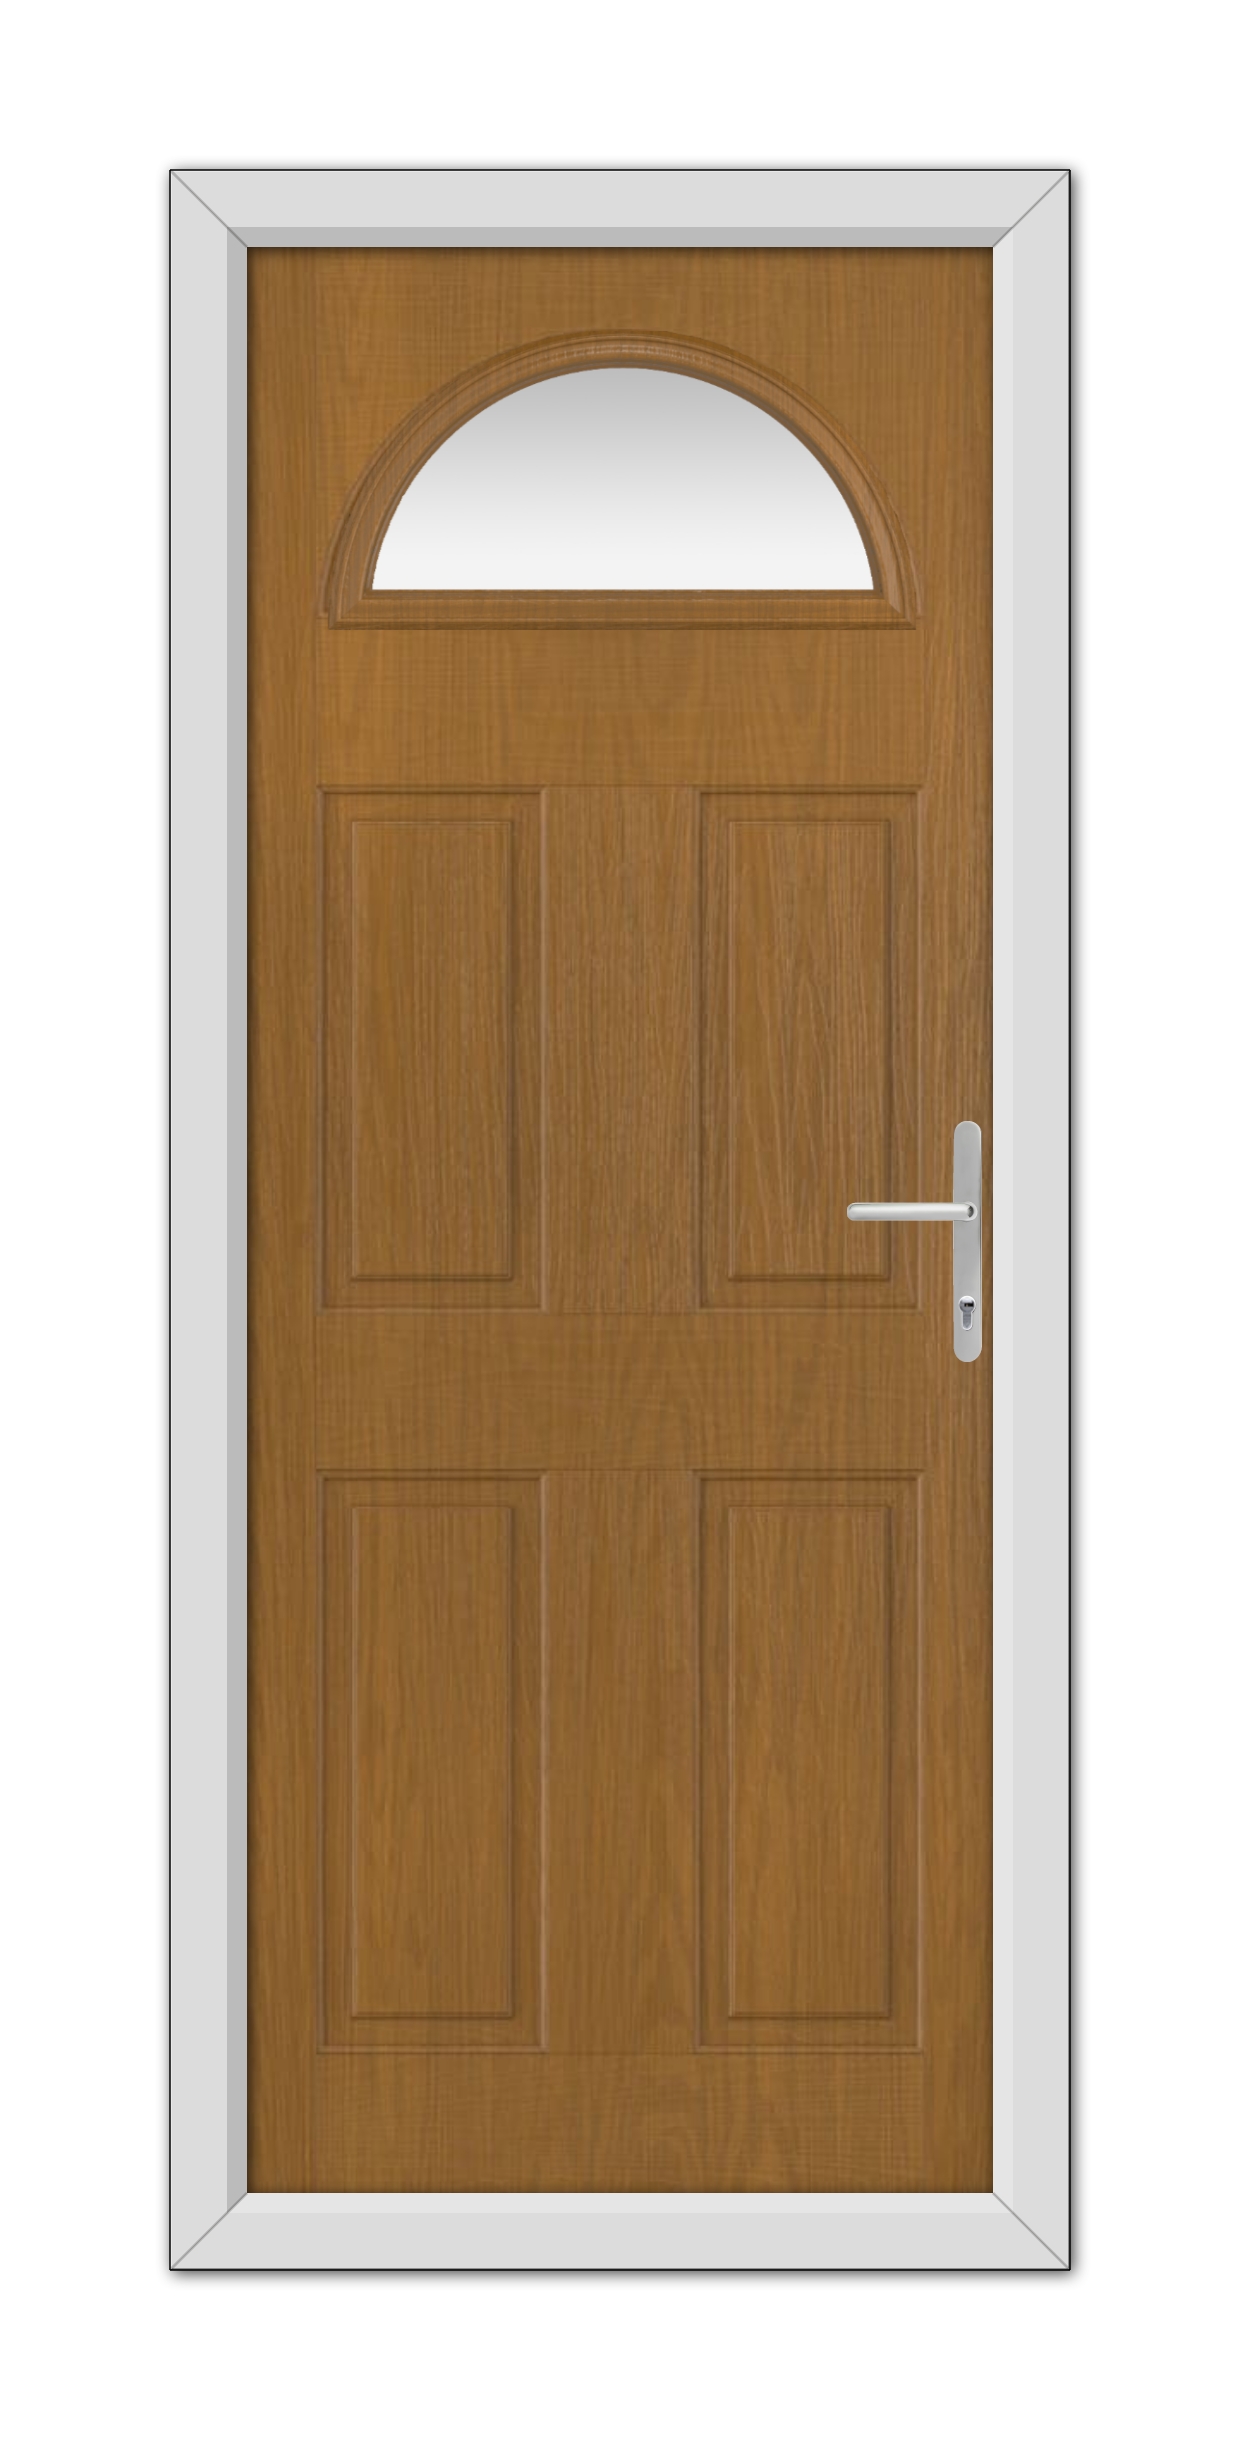 A Oak Winslow 1 Composite Door 48mm Timber Core with a semicircular window at the top, fitted with a white frame and handle, isolated on a white background.